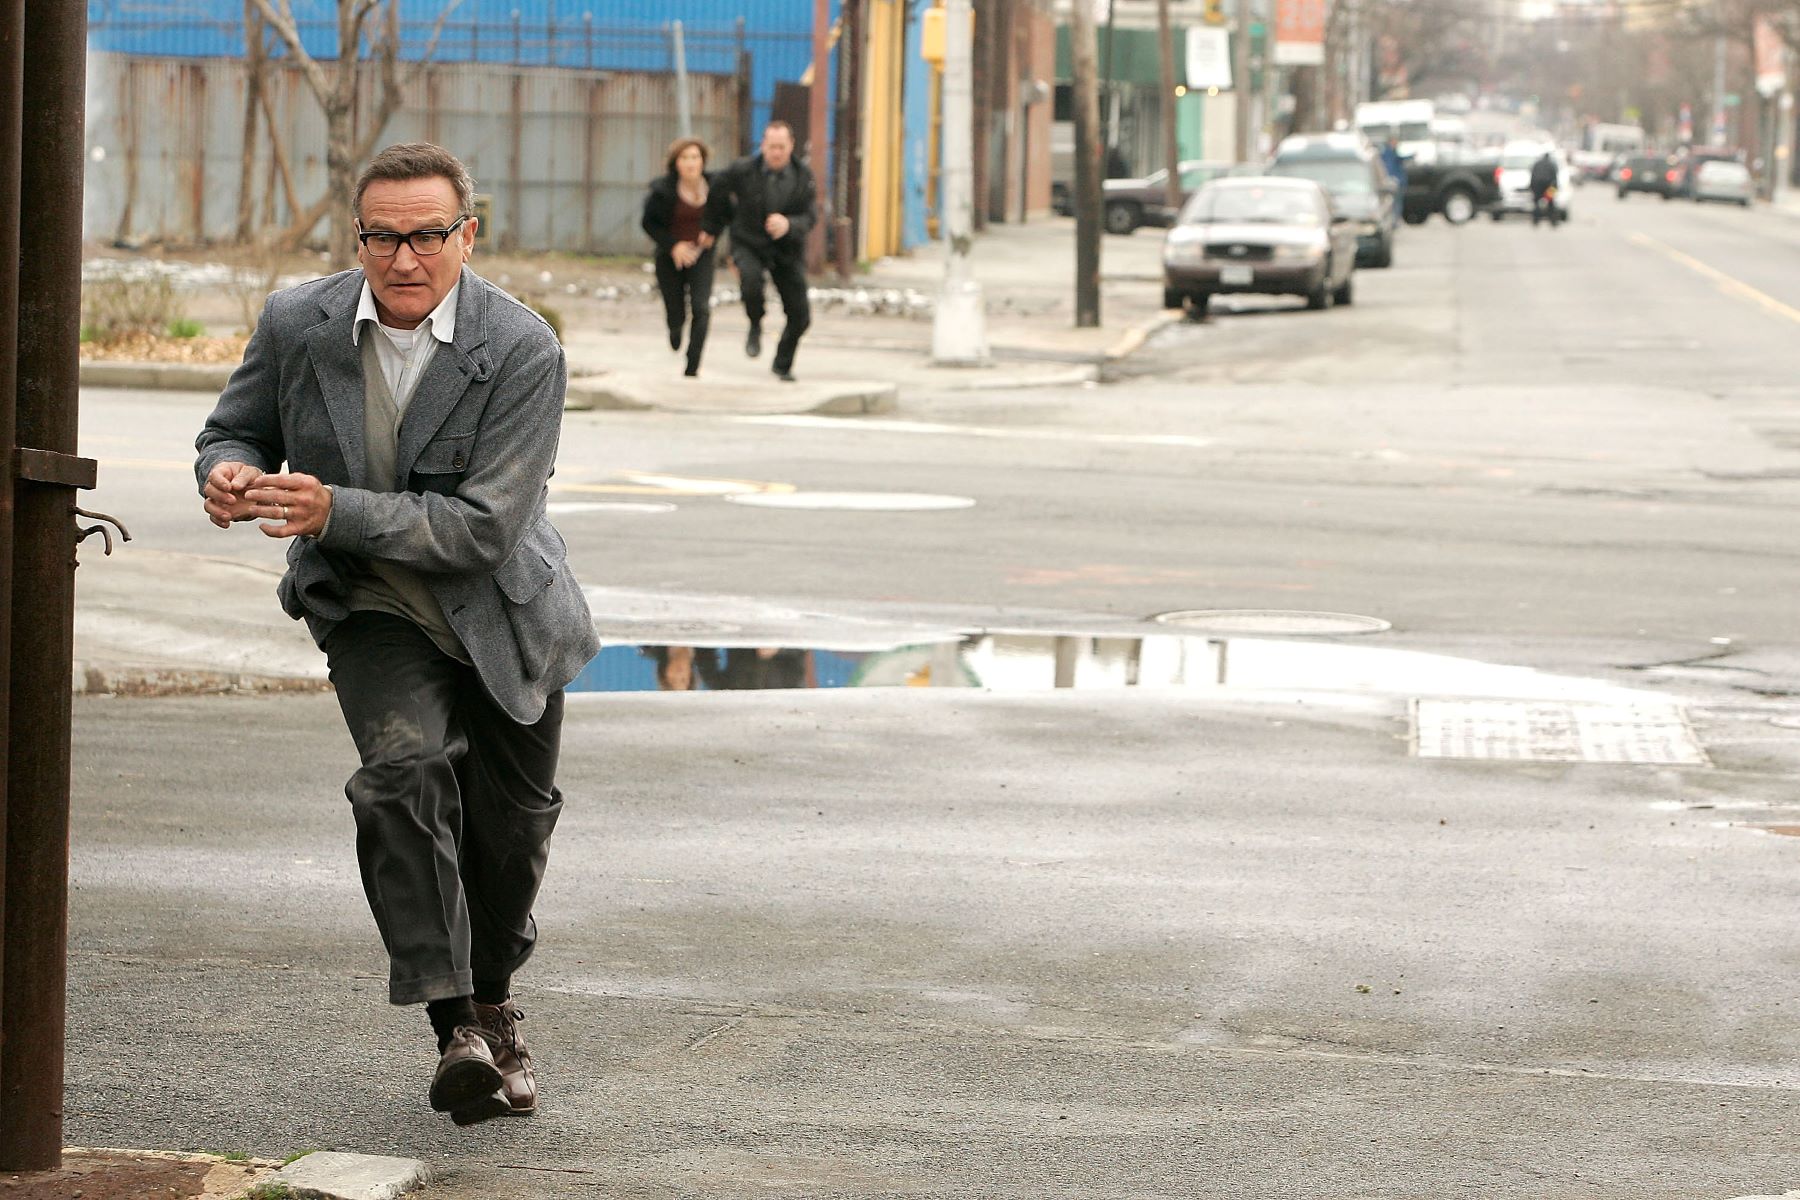 Robin Williams guest-starring on 'Law and Order SVU' shot in New York City